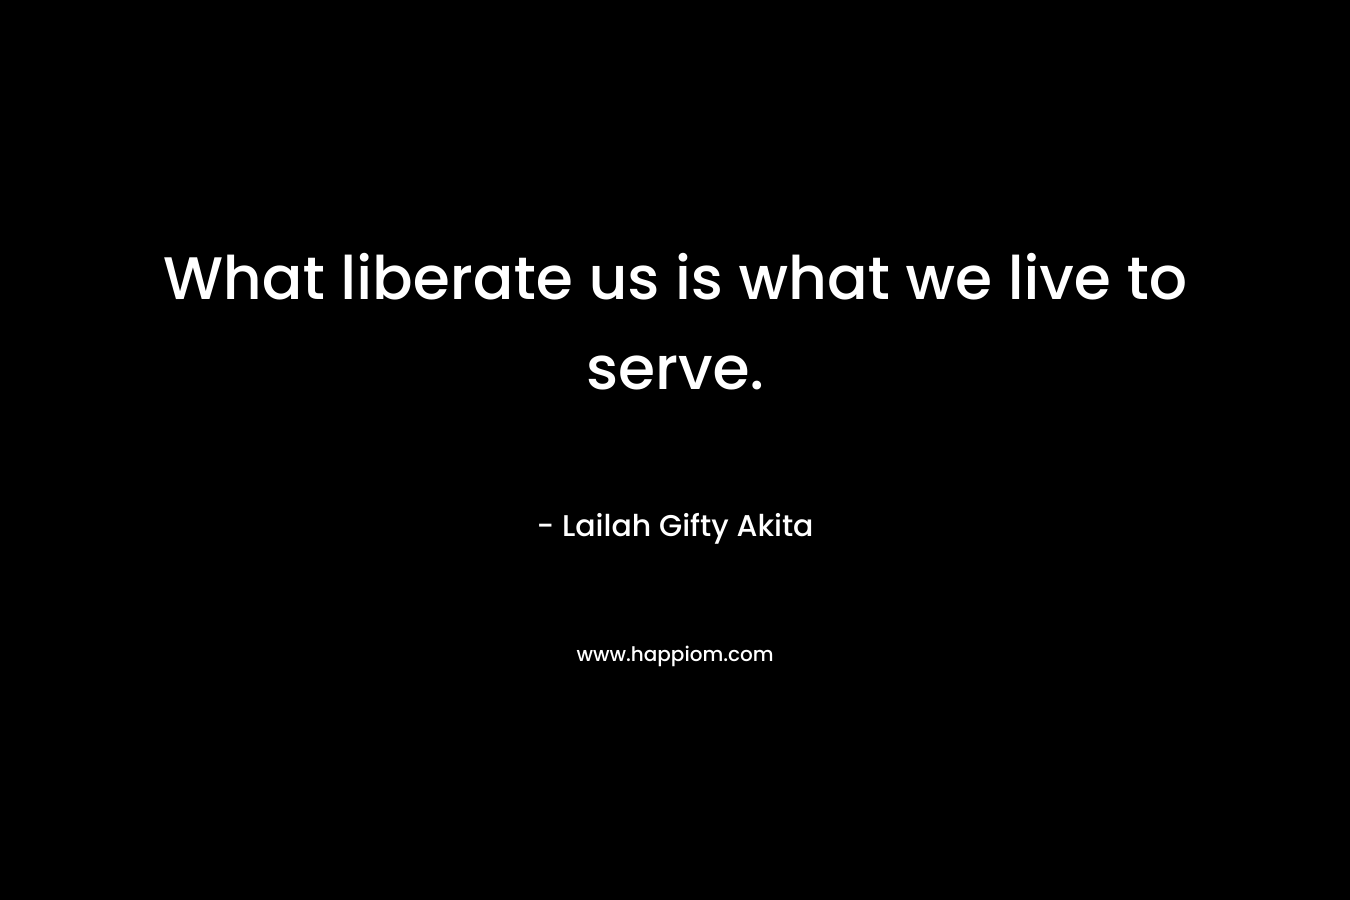 What liberate us is what we live to serve.